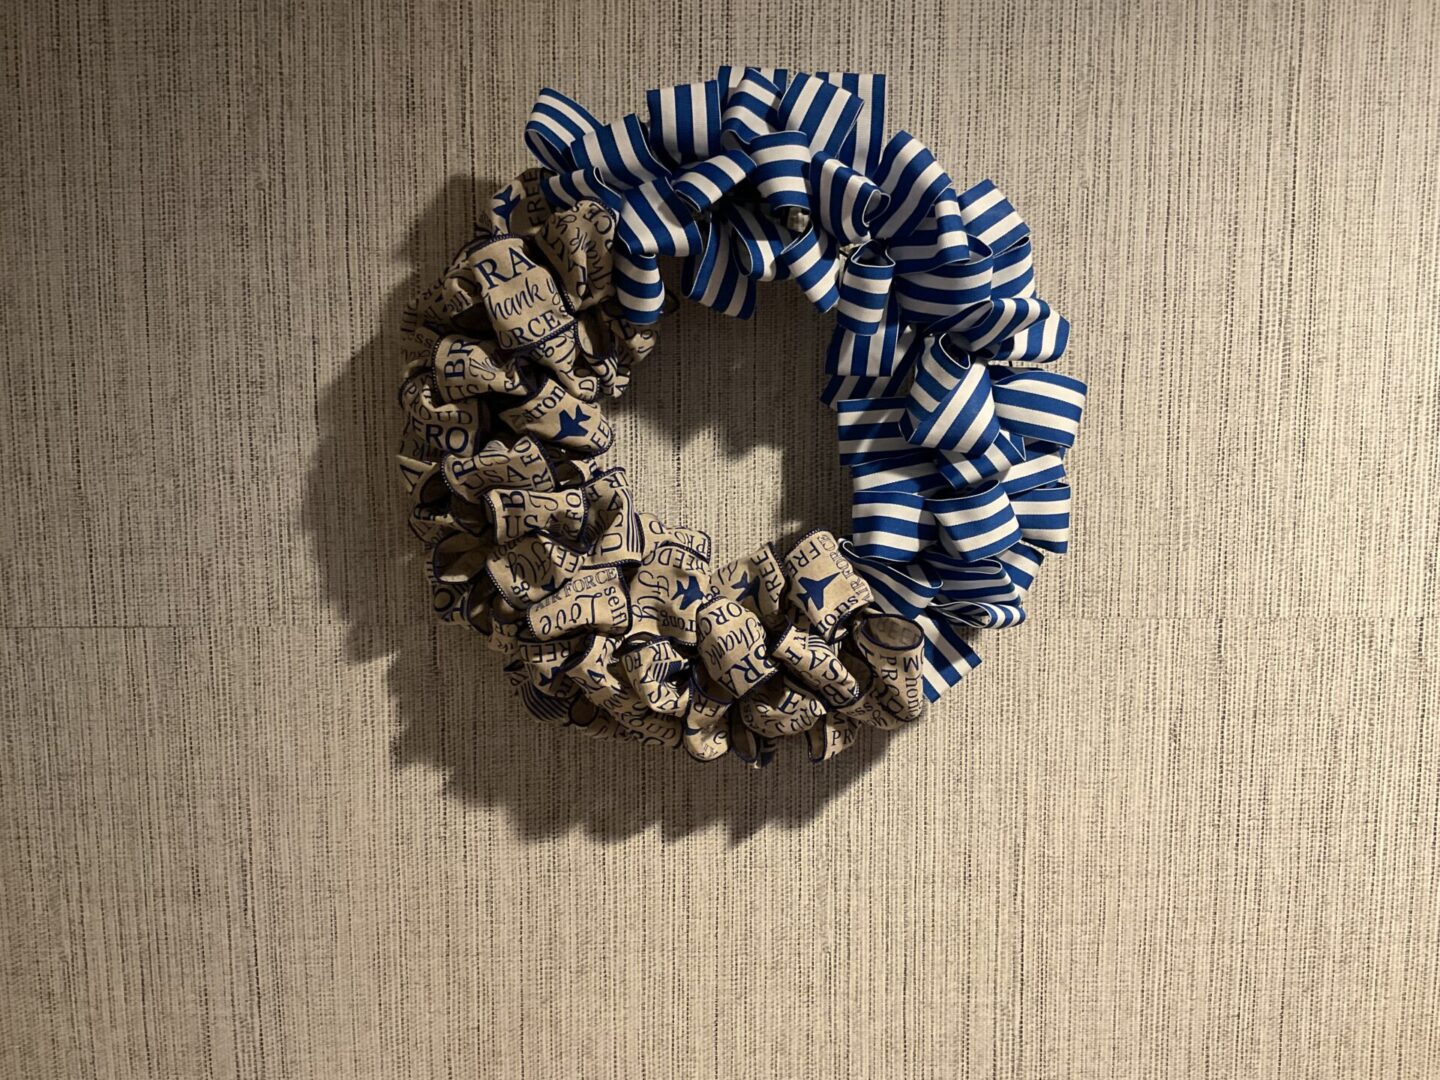 A wreath made of fabric and paper.